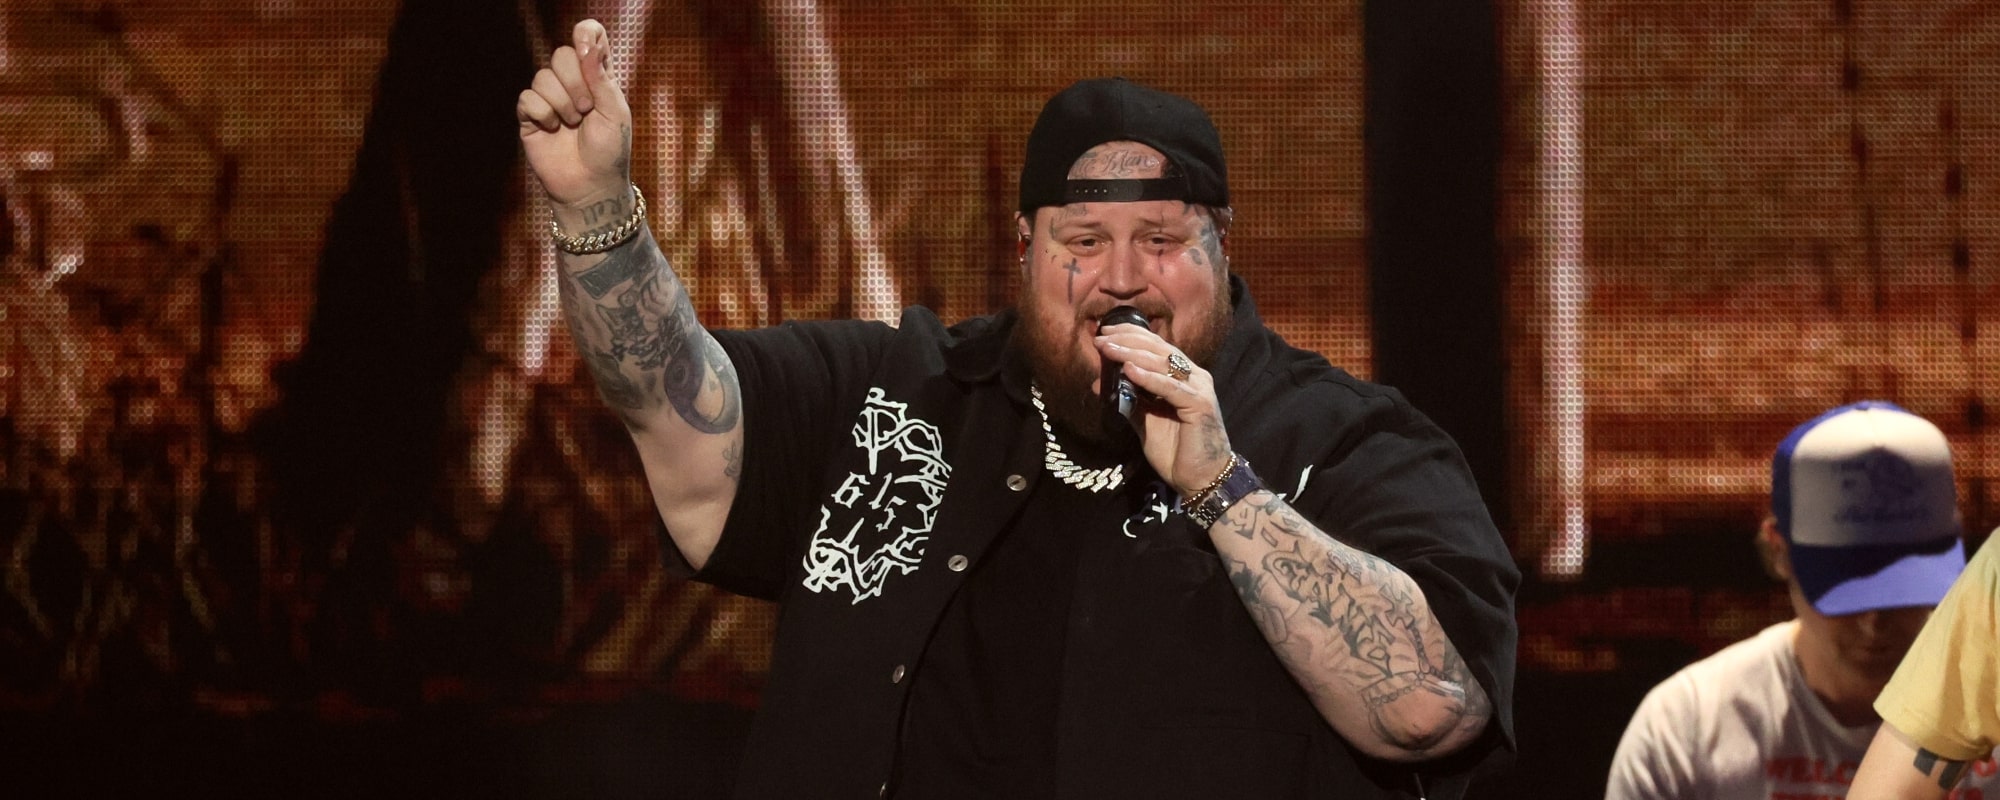 Jelly Roll Reveals How Time as Independent Rapper Was Catalyst for Country Music Success